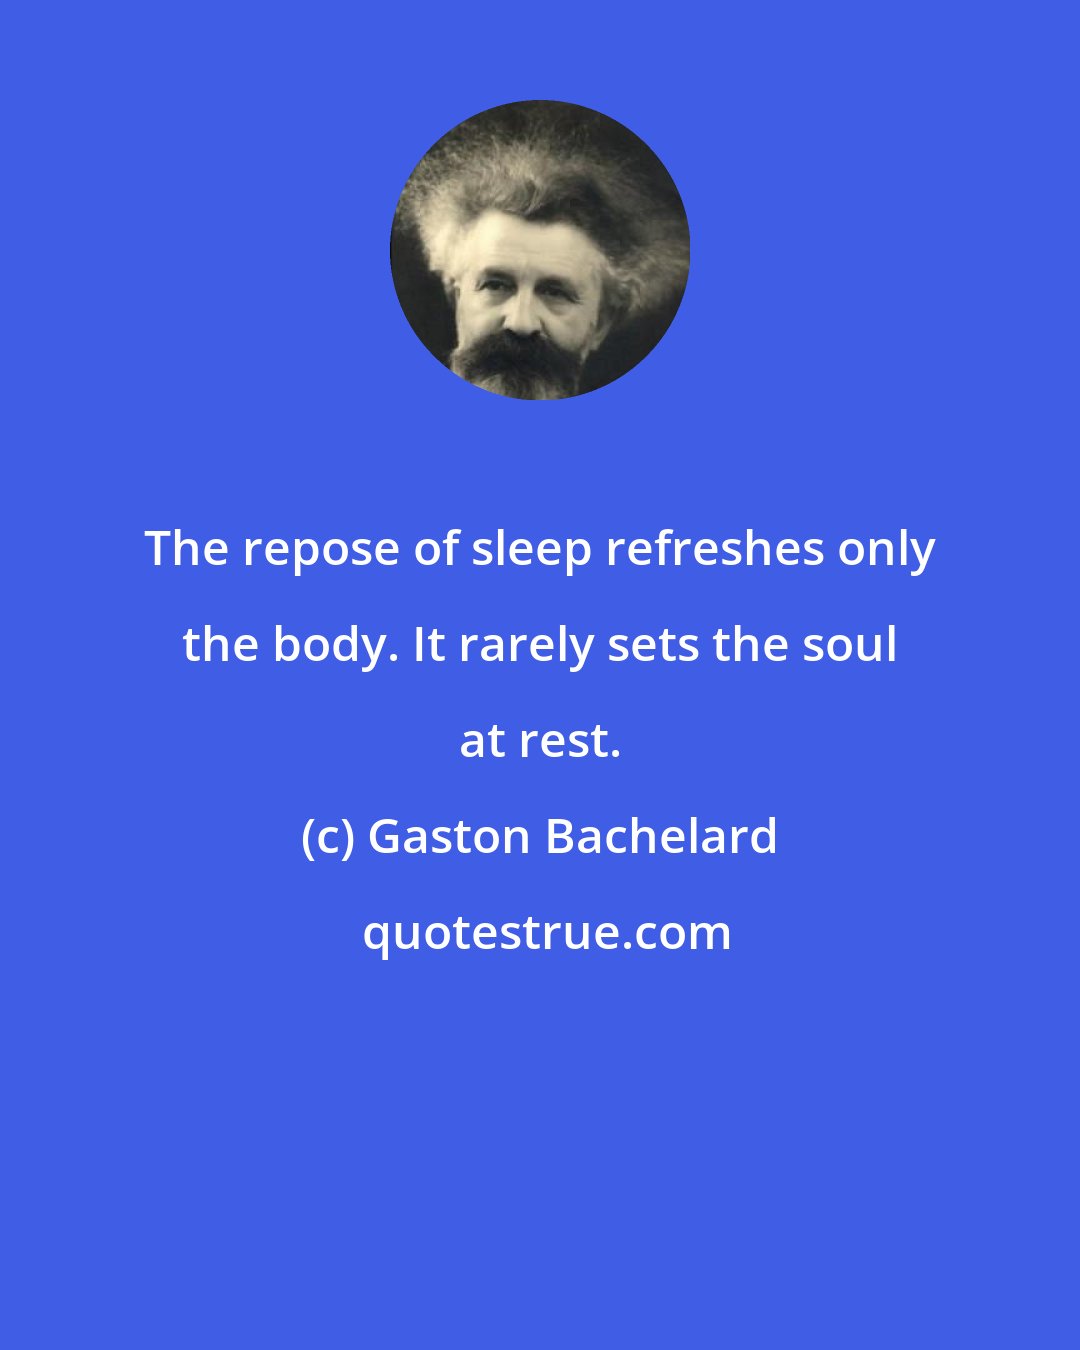 Gaston Bachelard: The repose of sleep refreshes only the body. It rarely sets the soul at rest.